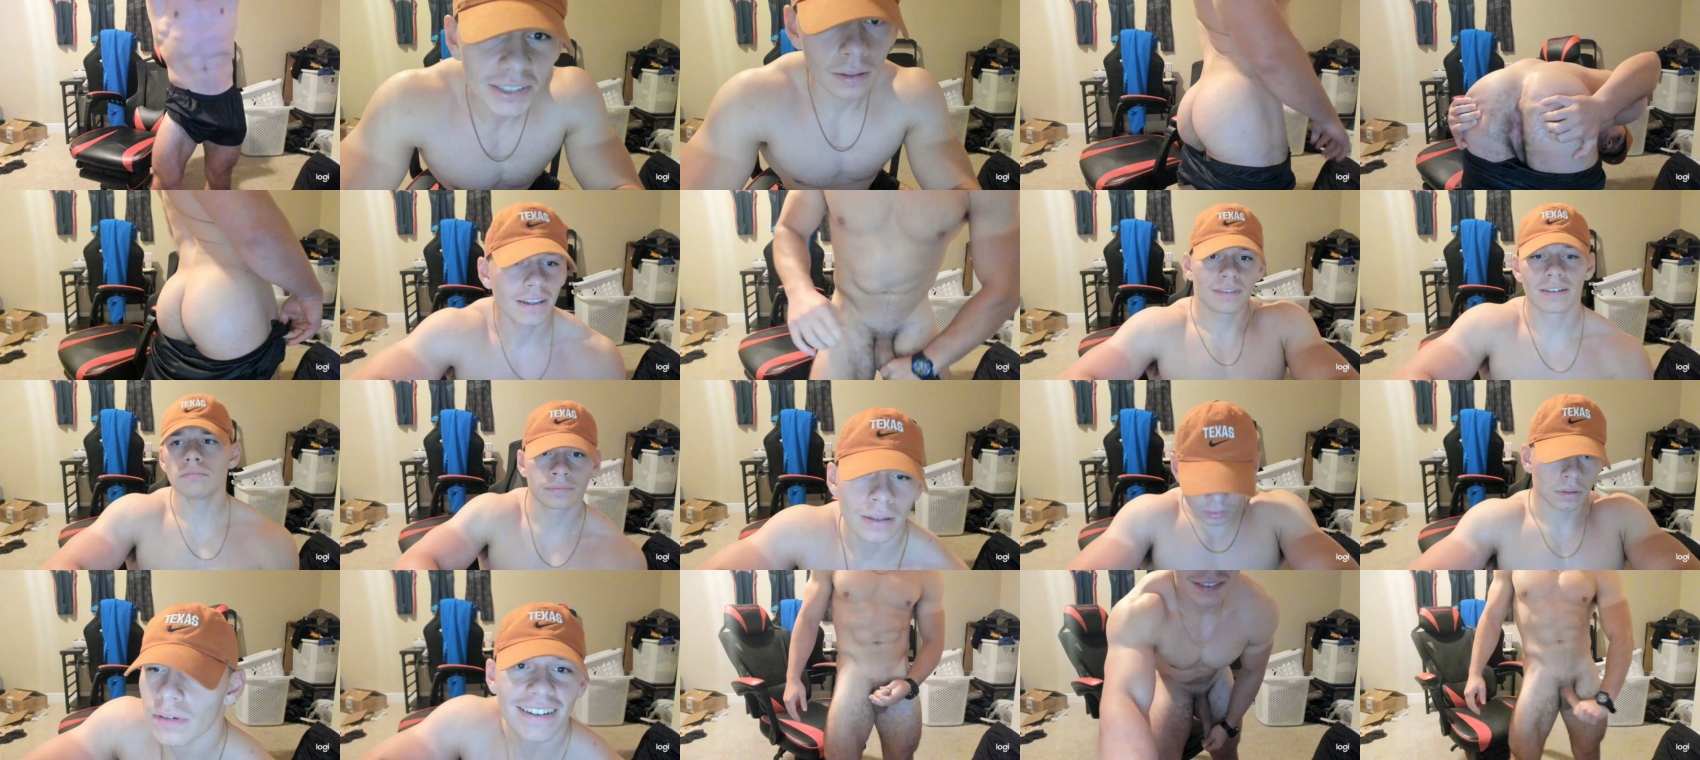 theshortking_ natural CAM SHOW @ Chaturbate 09-09-2022